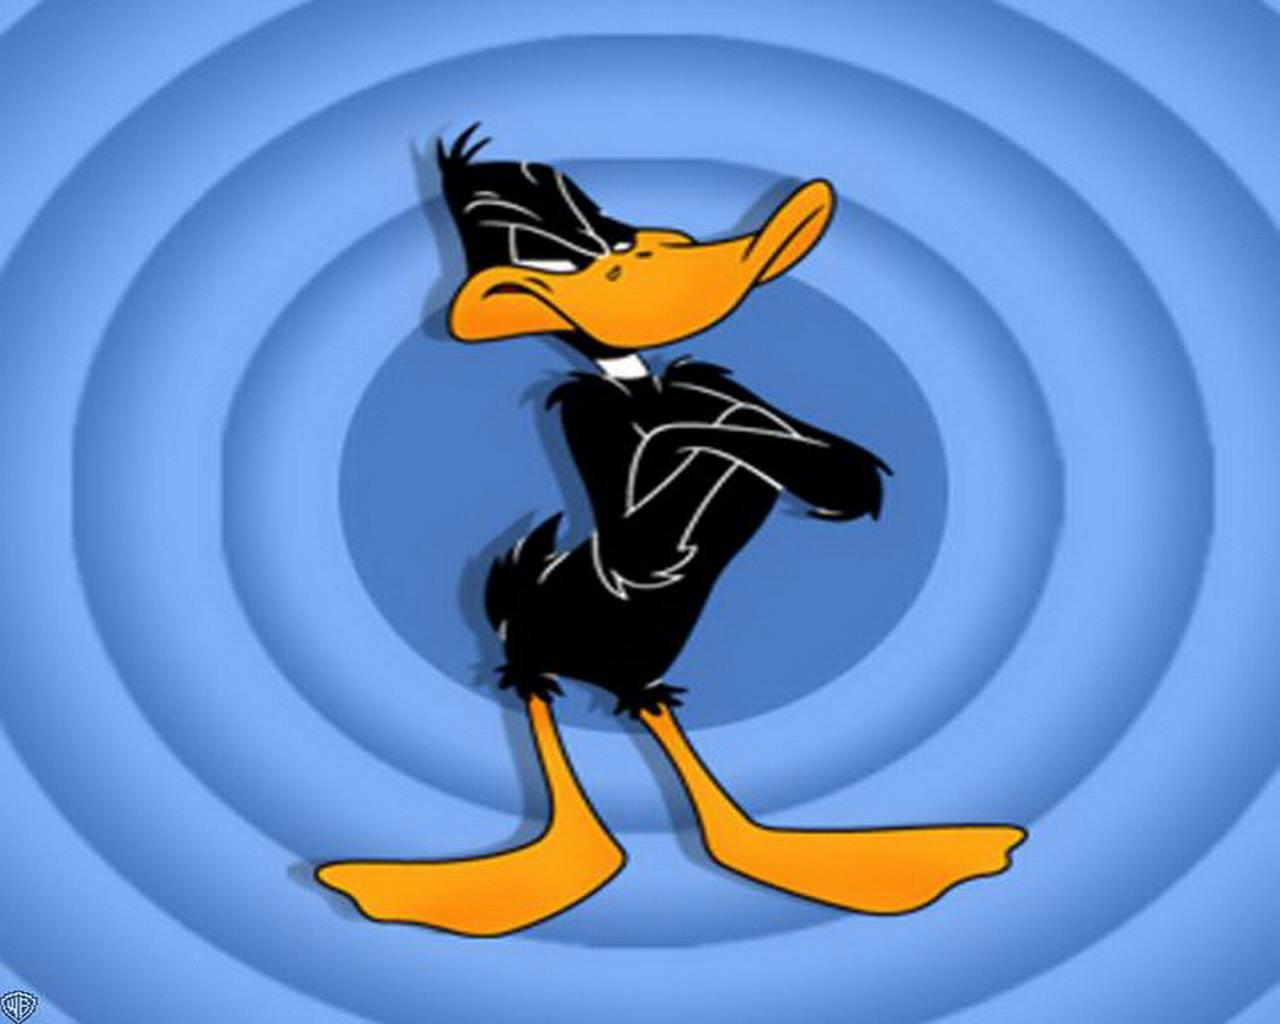 Brutal Daffy Duck Art Wallpapers  Daffy Duck Wallpaper for iPhone